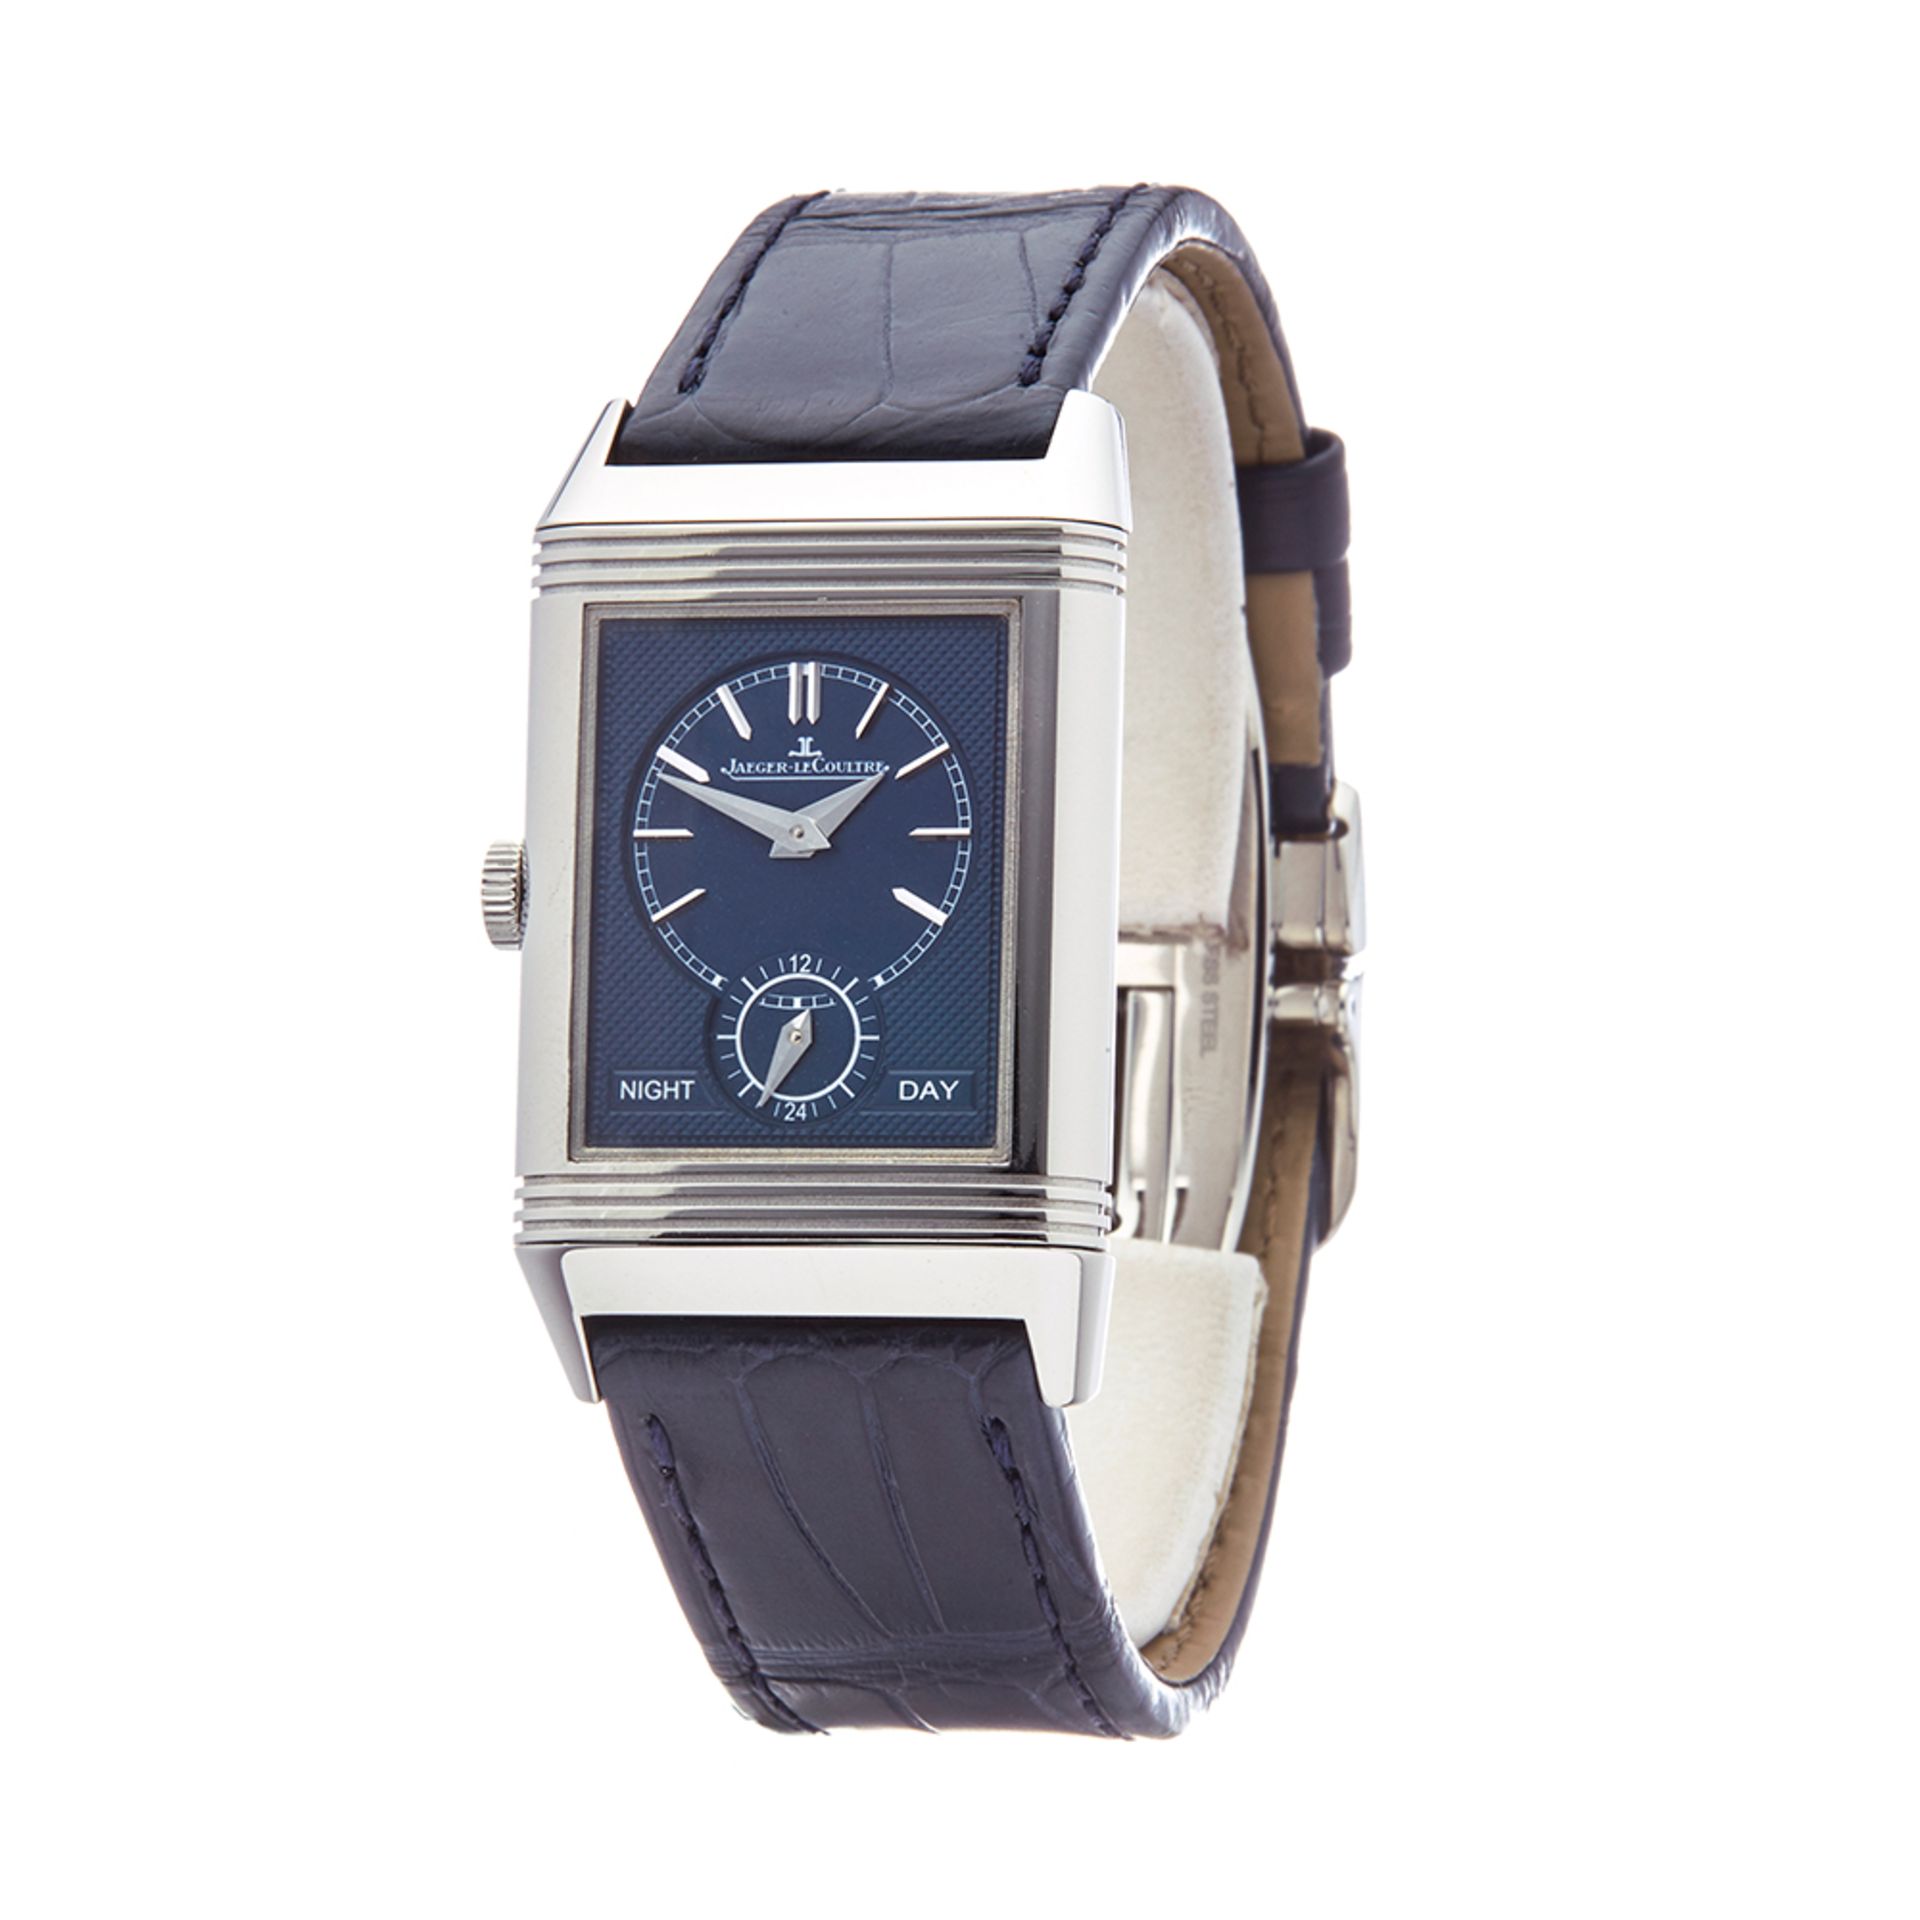 Jaeger-LeCoultre Reverso Tribute Duo Day Night Stainless Steel - Q3908420 - Image 4 of 9